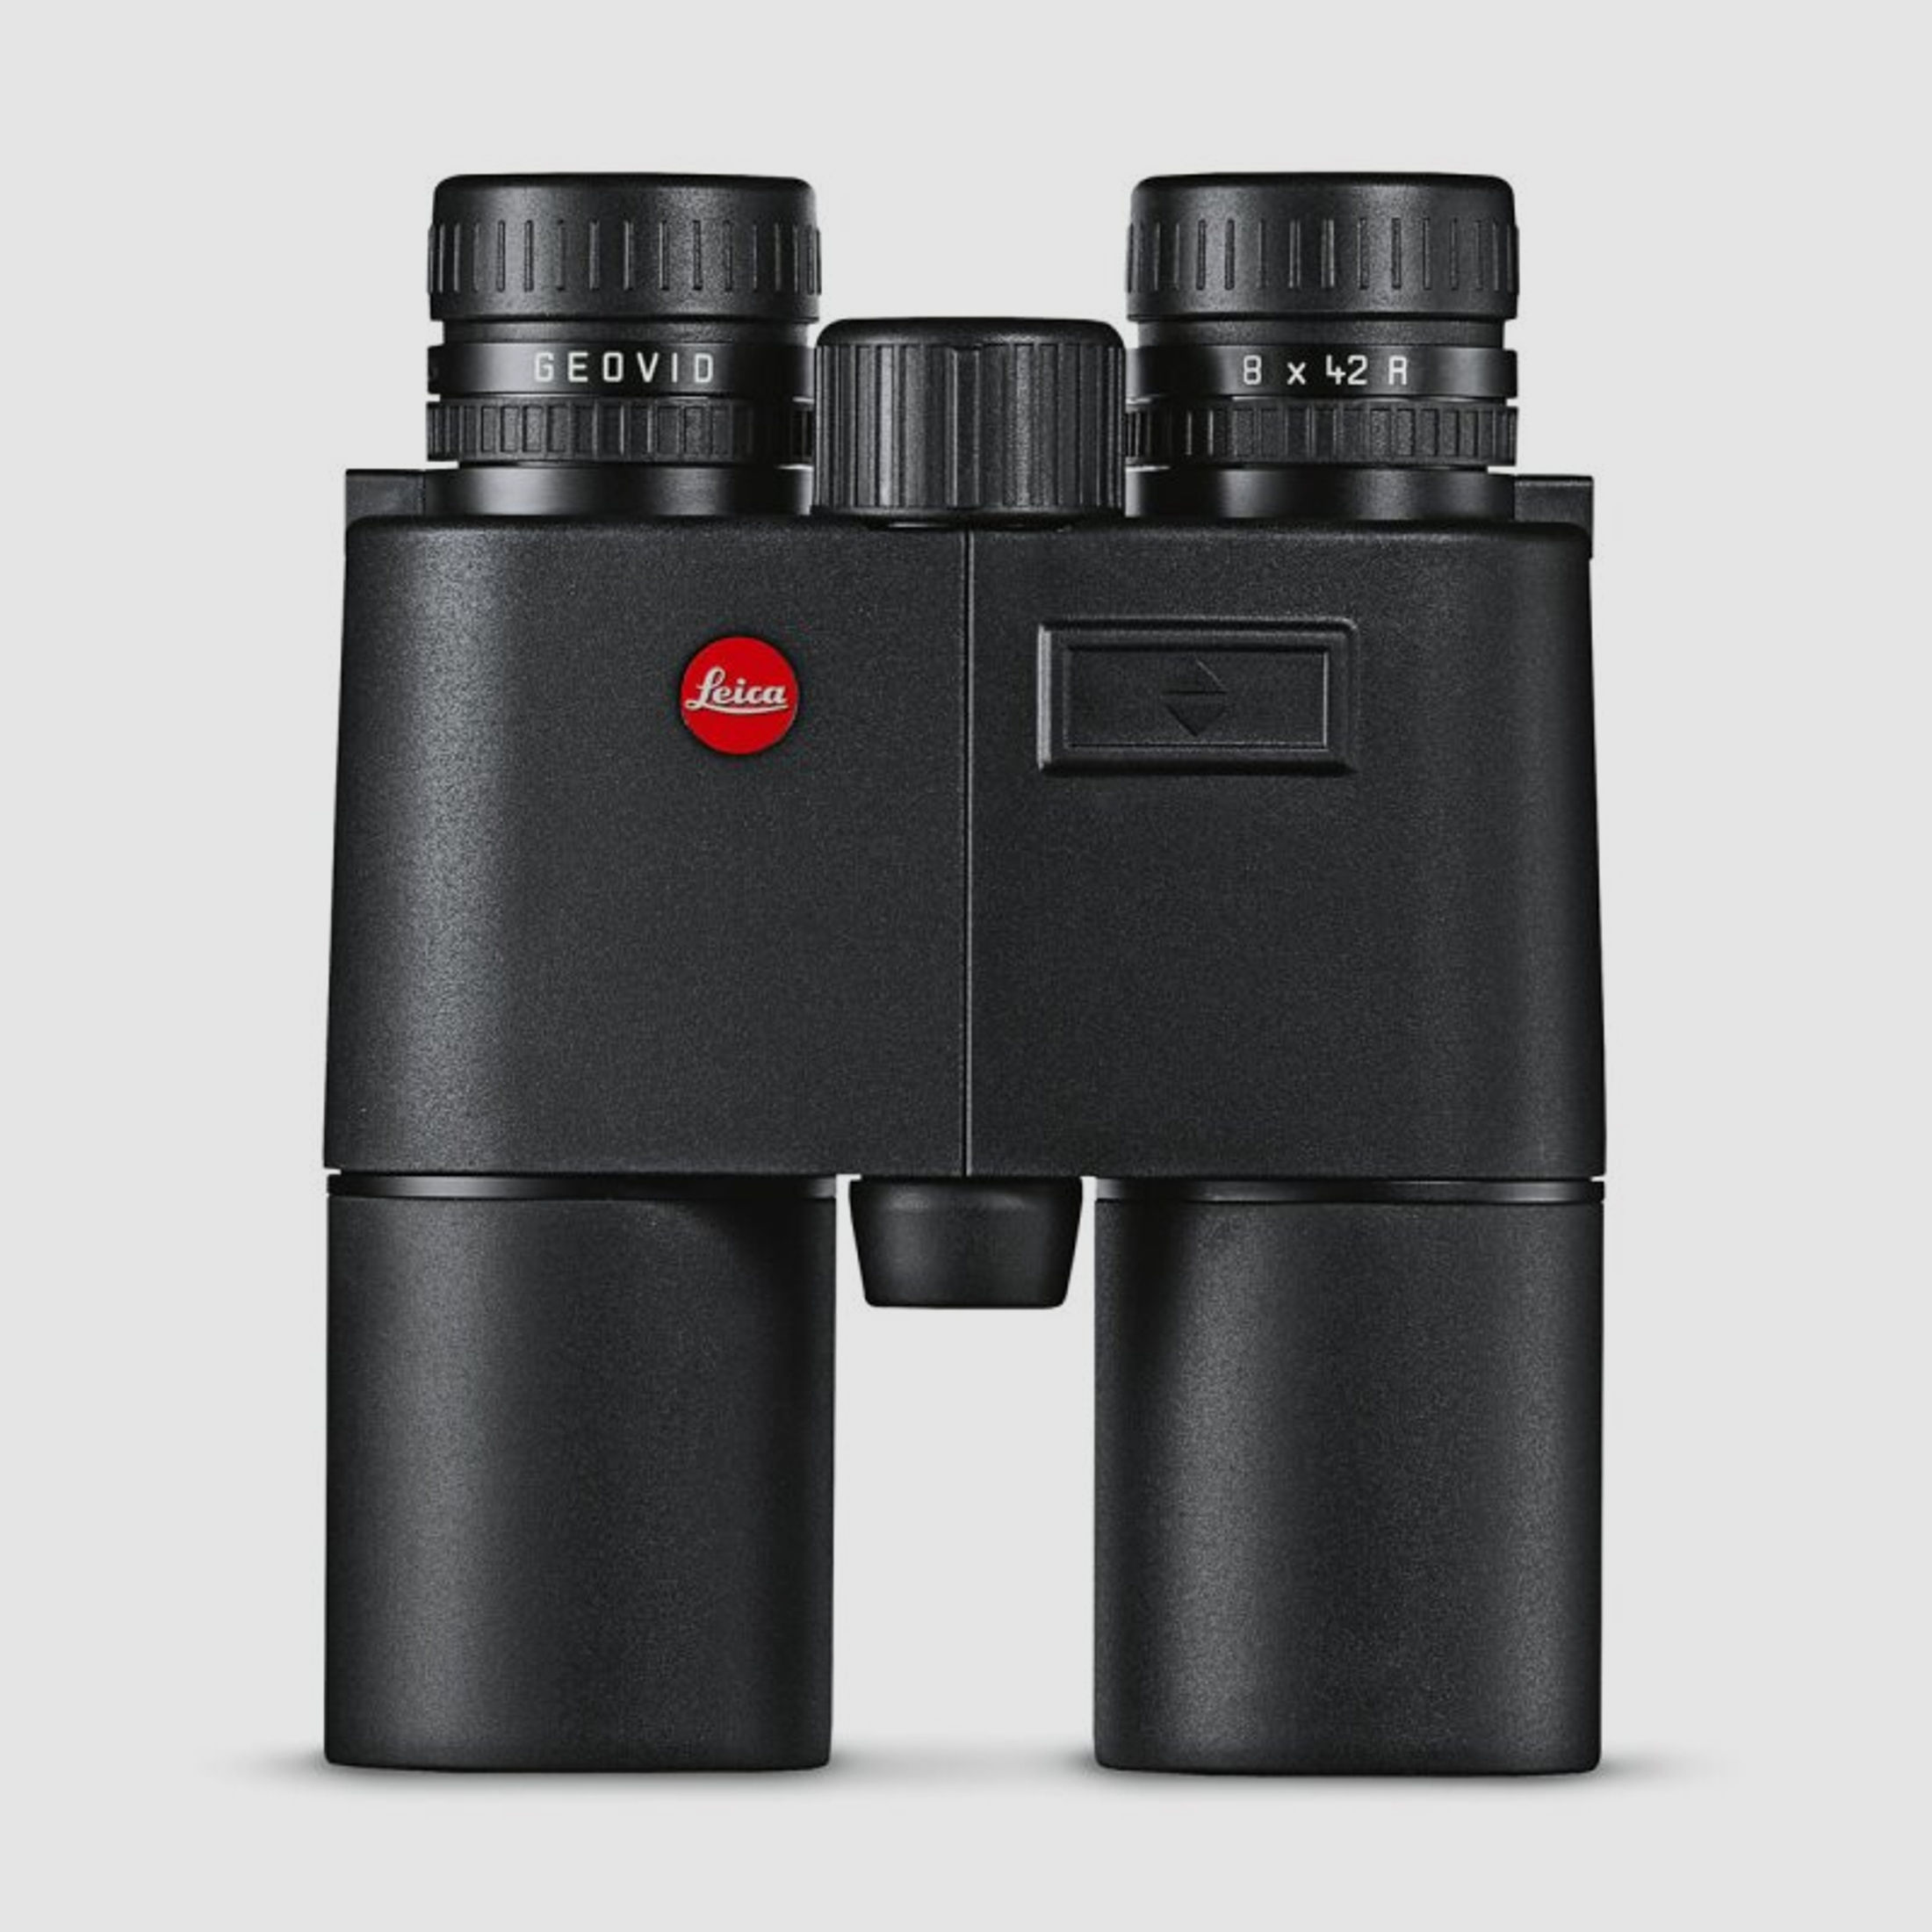 Leica Fortis 6 2-12x50i L-4A